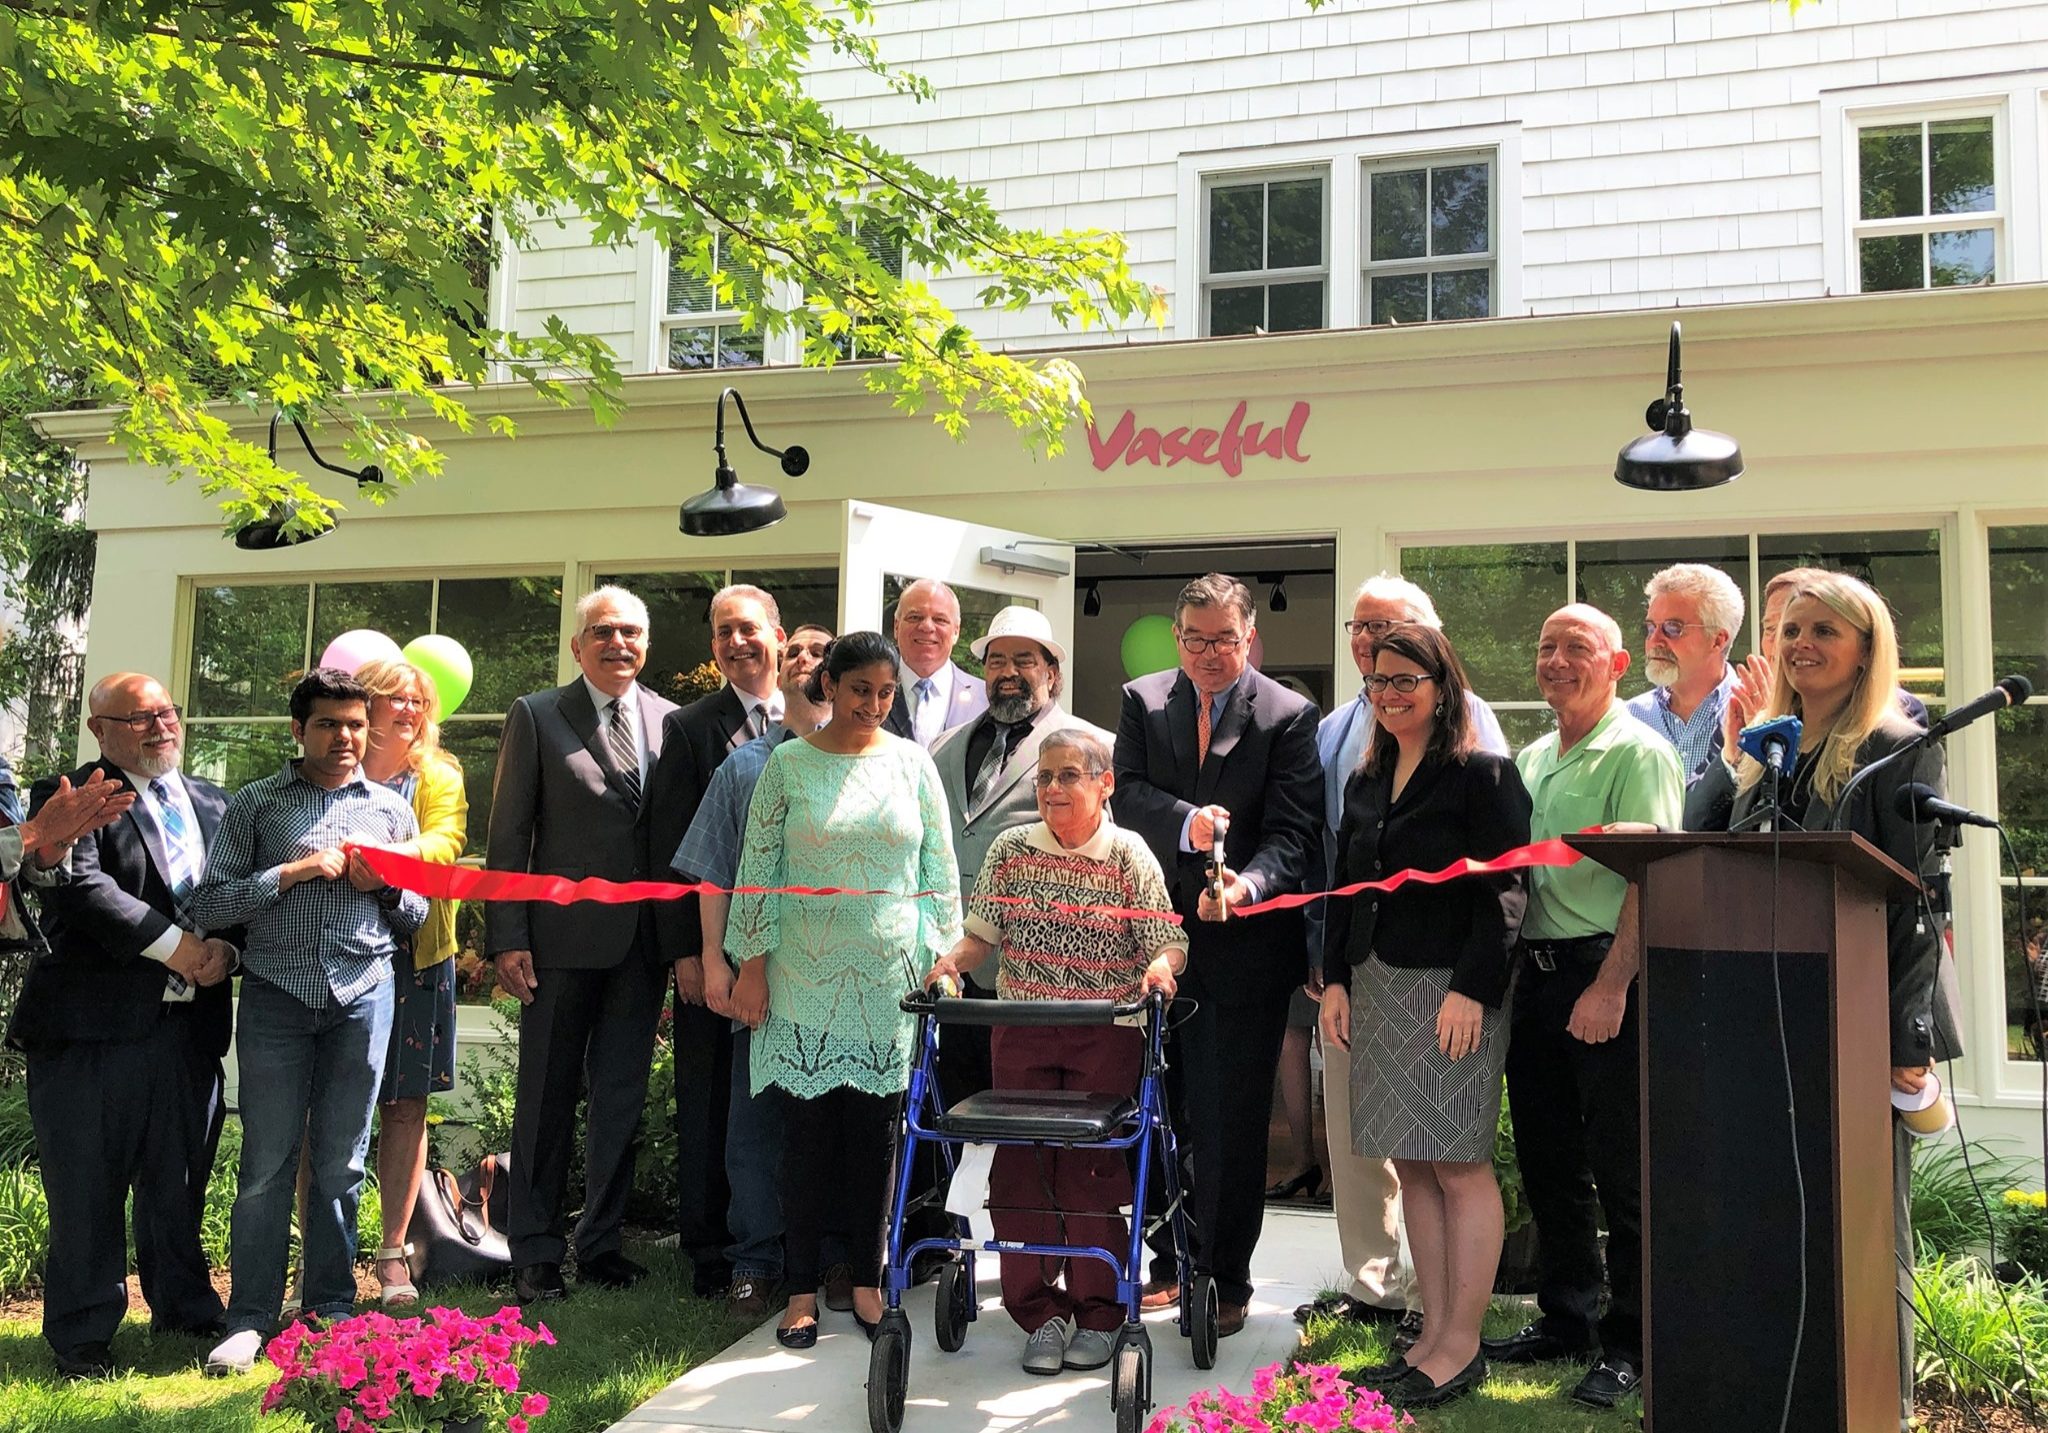 We held a ribbon cutting to celebrate the opening of our second store location.